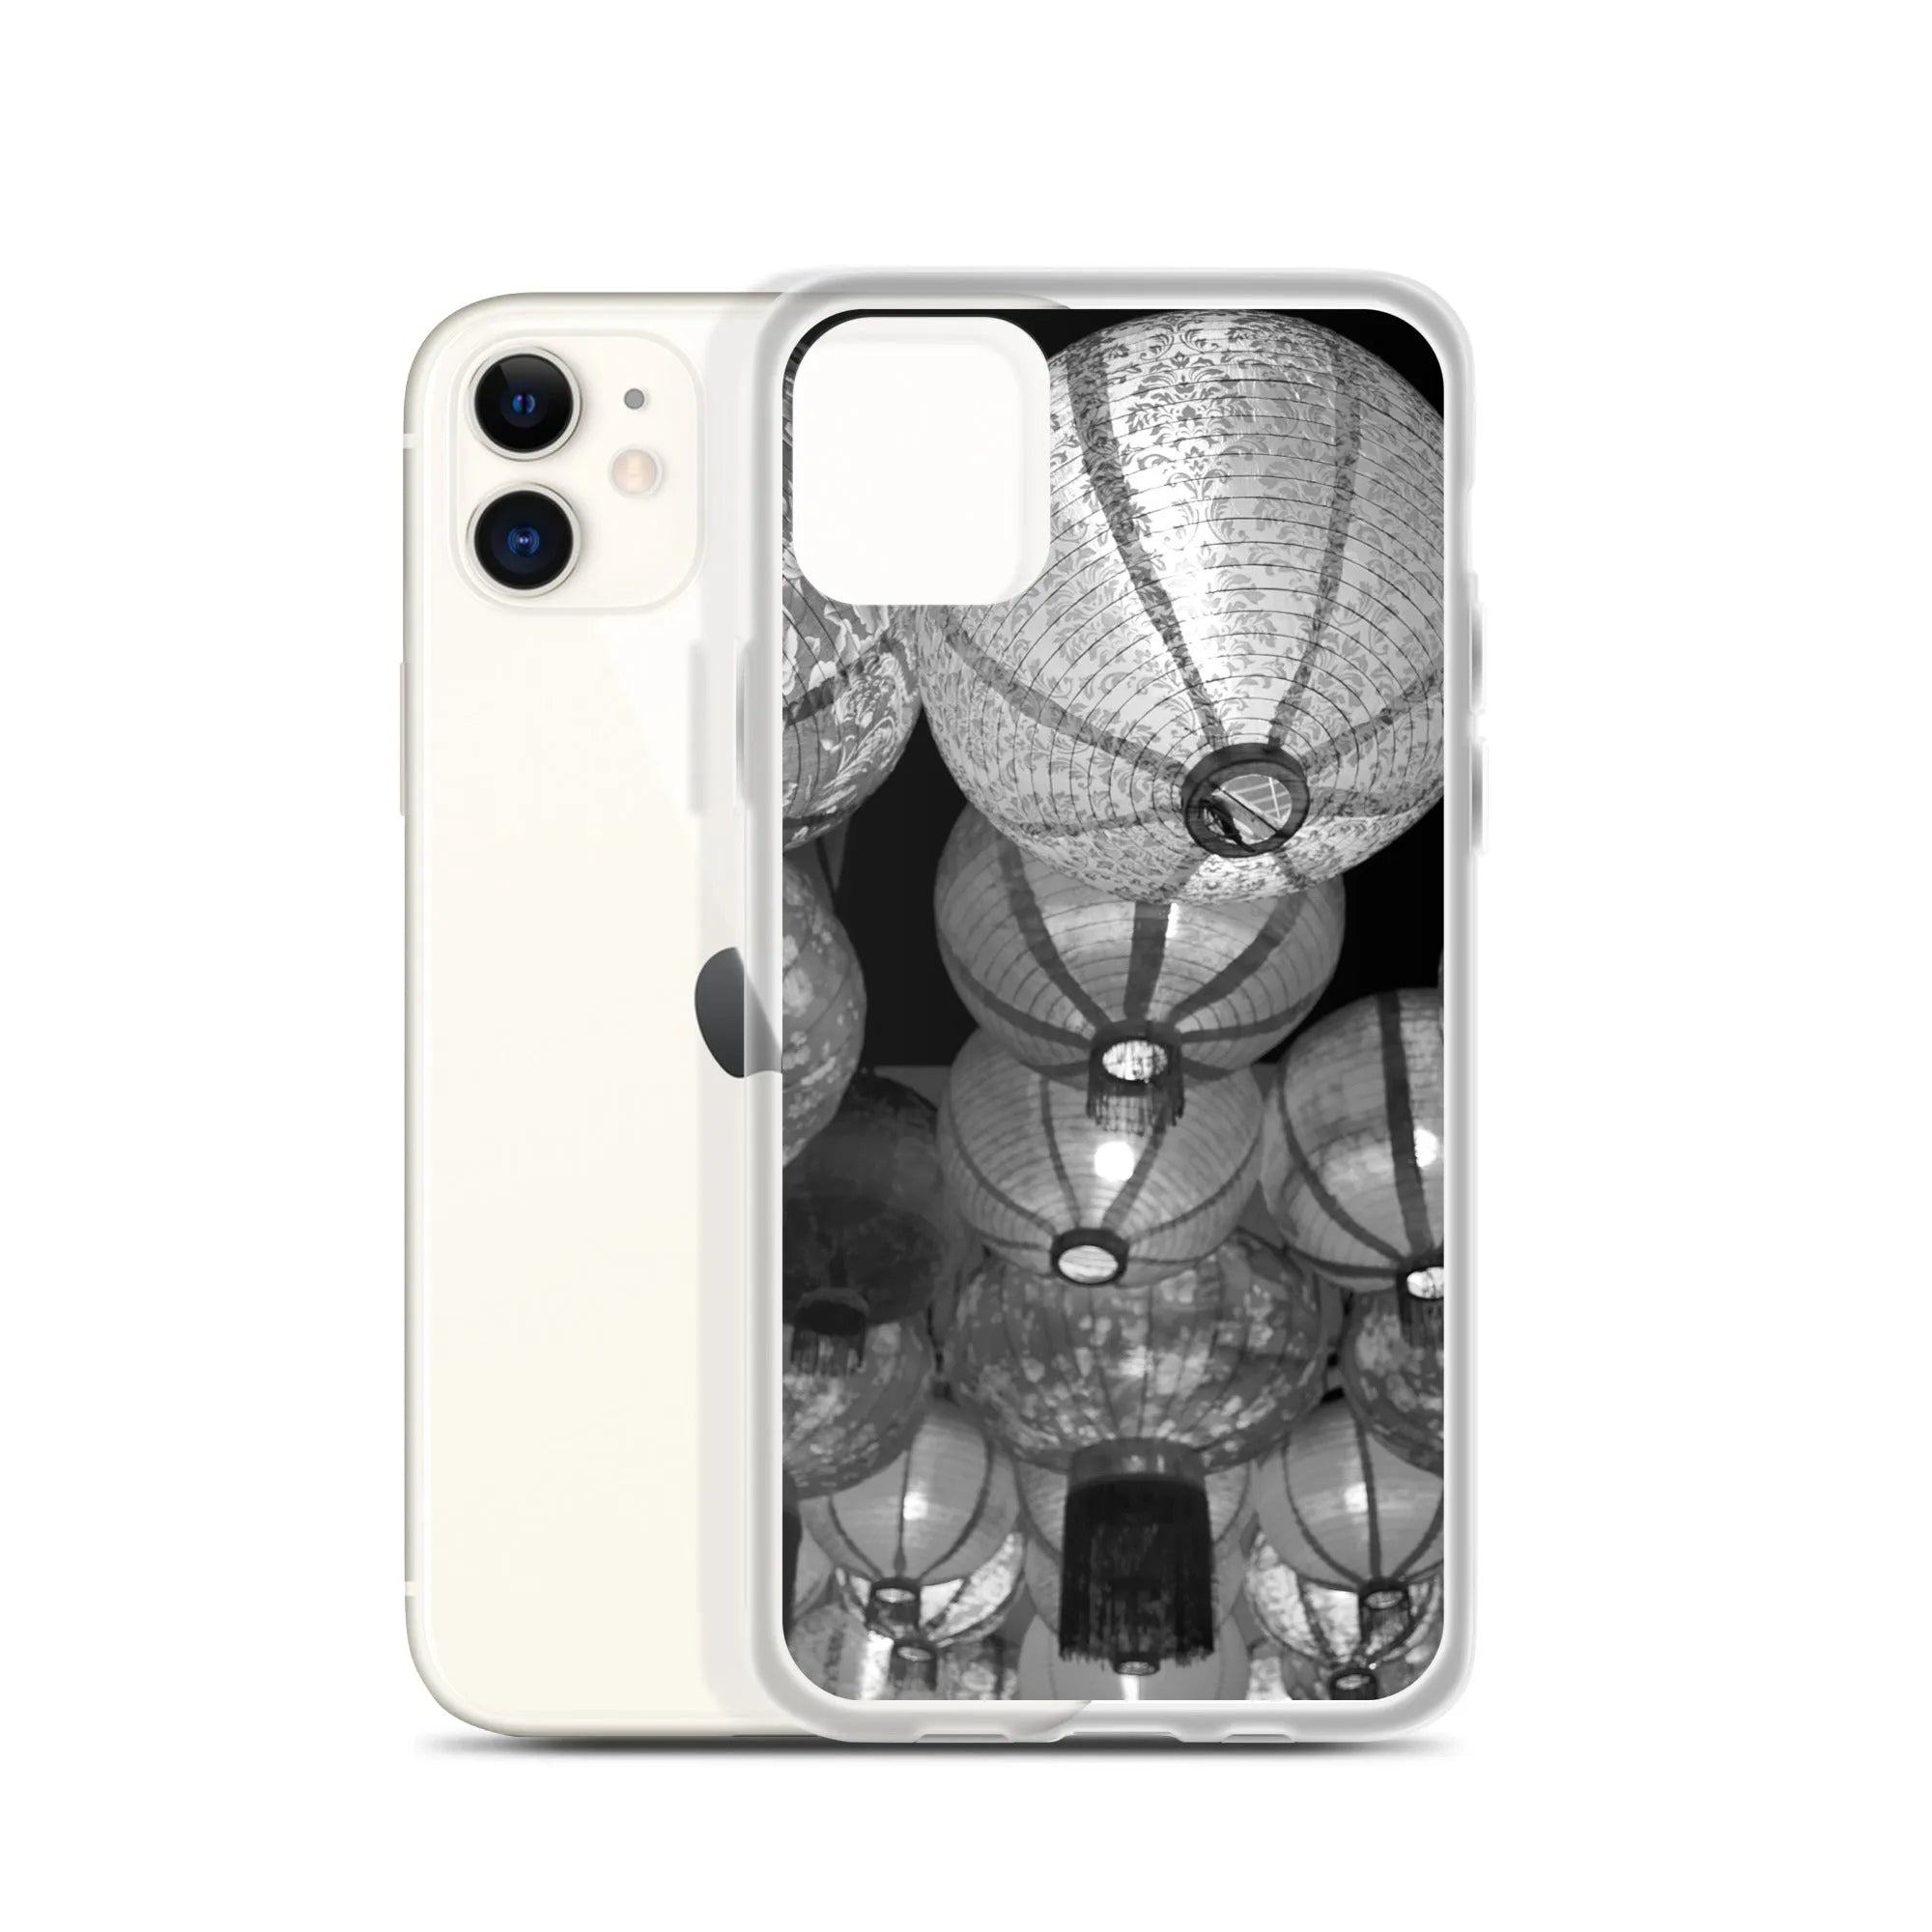 Raise The Red Lanterns - Designer Travels Art Iphone Case - Black And White - Iphone 11 - Mobile Phone Cases